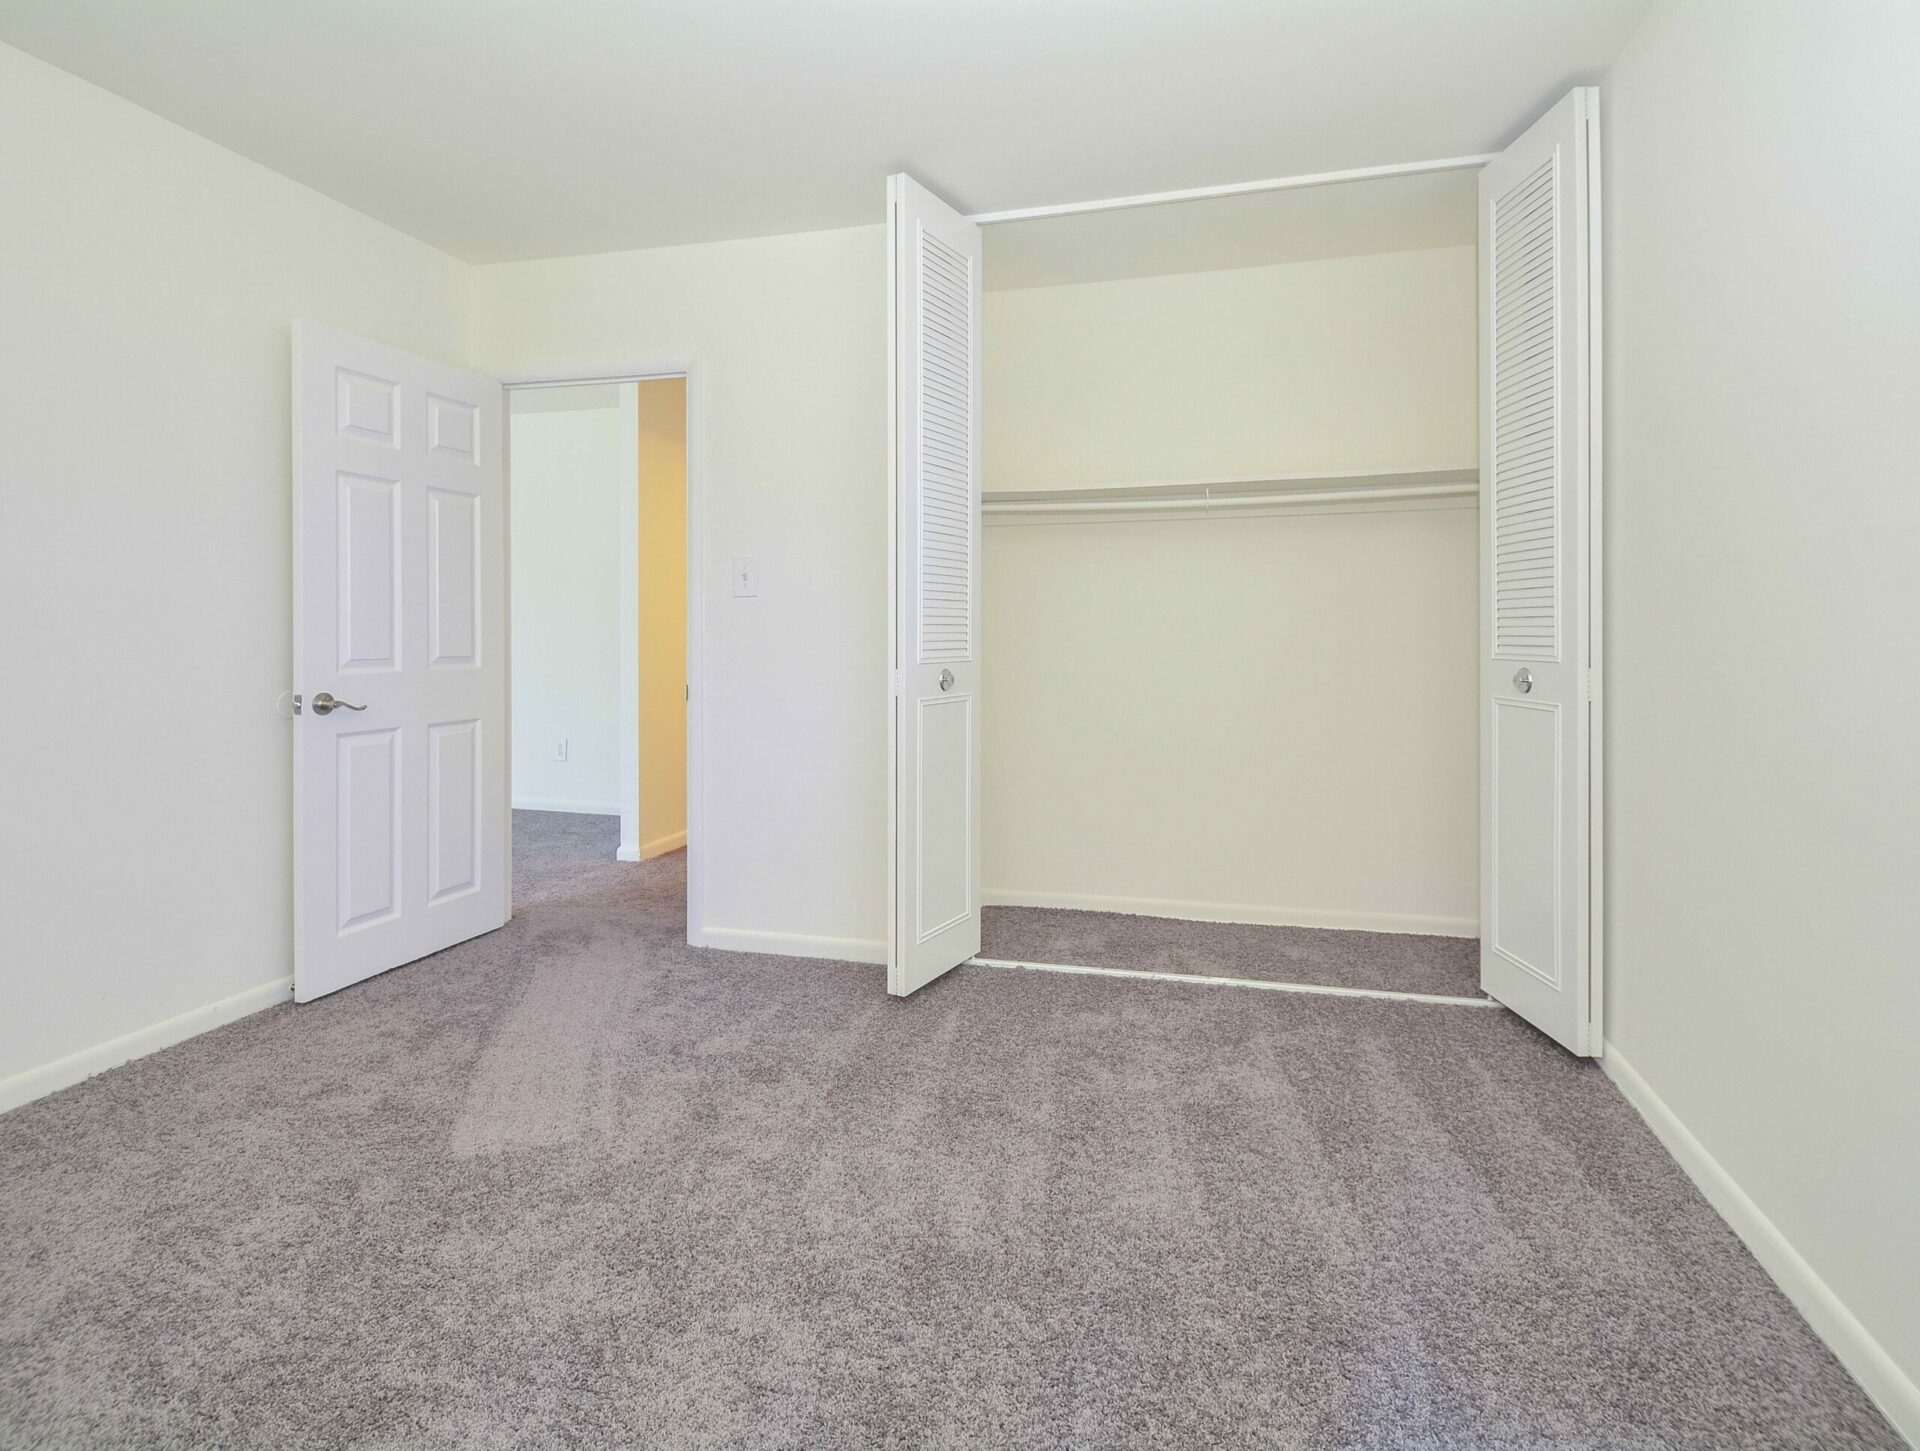 Bedroom with grey carpet and a large closet.